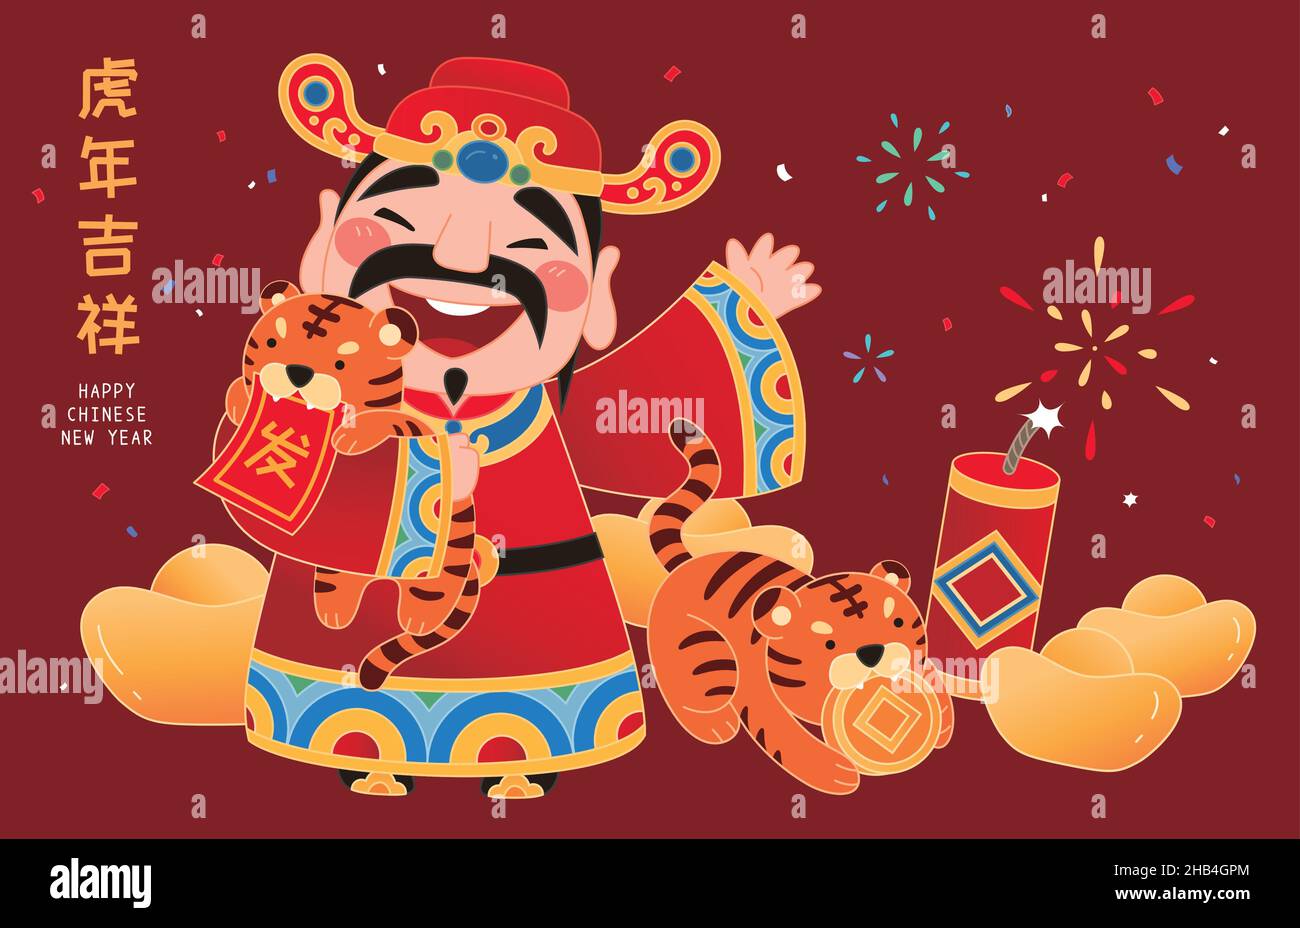 Chinese new year greeting design. God of wealth with cute tiger characters, gold coin, ingots and fire cracker. Flat style illustration. Translation: Stock Vector